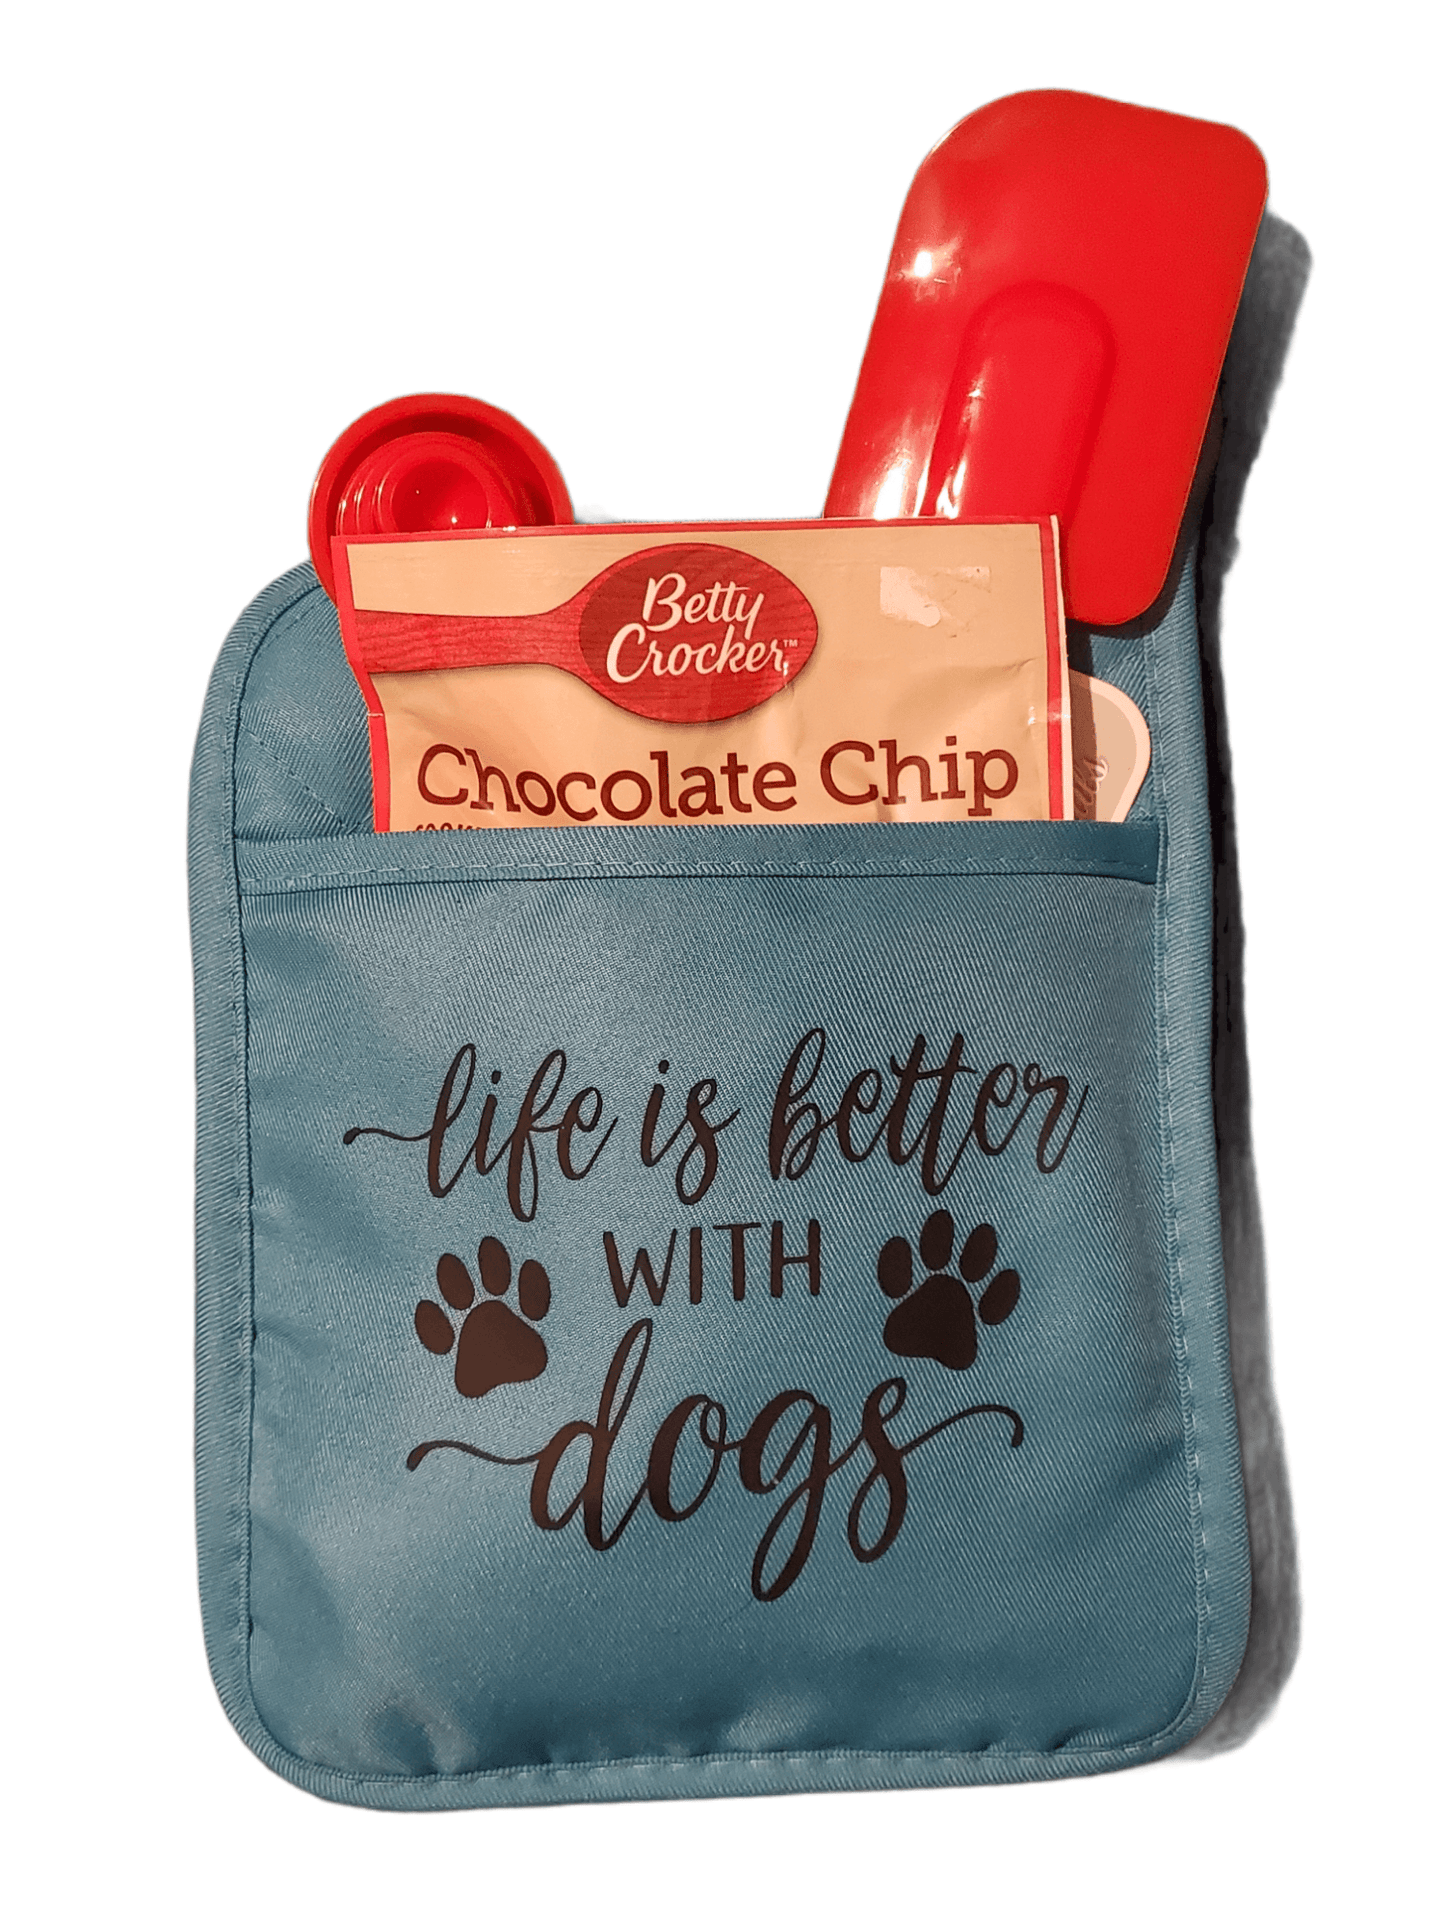 Life Is Better with Dogs Pot Holder - Erikas Crafts